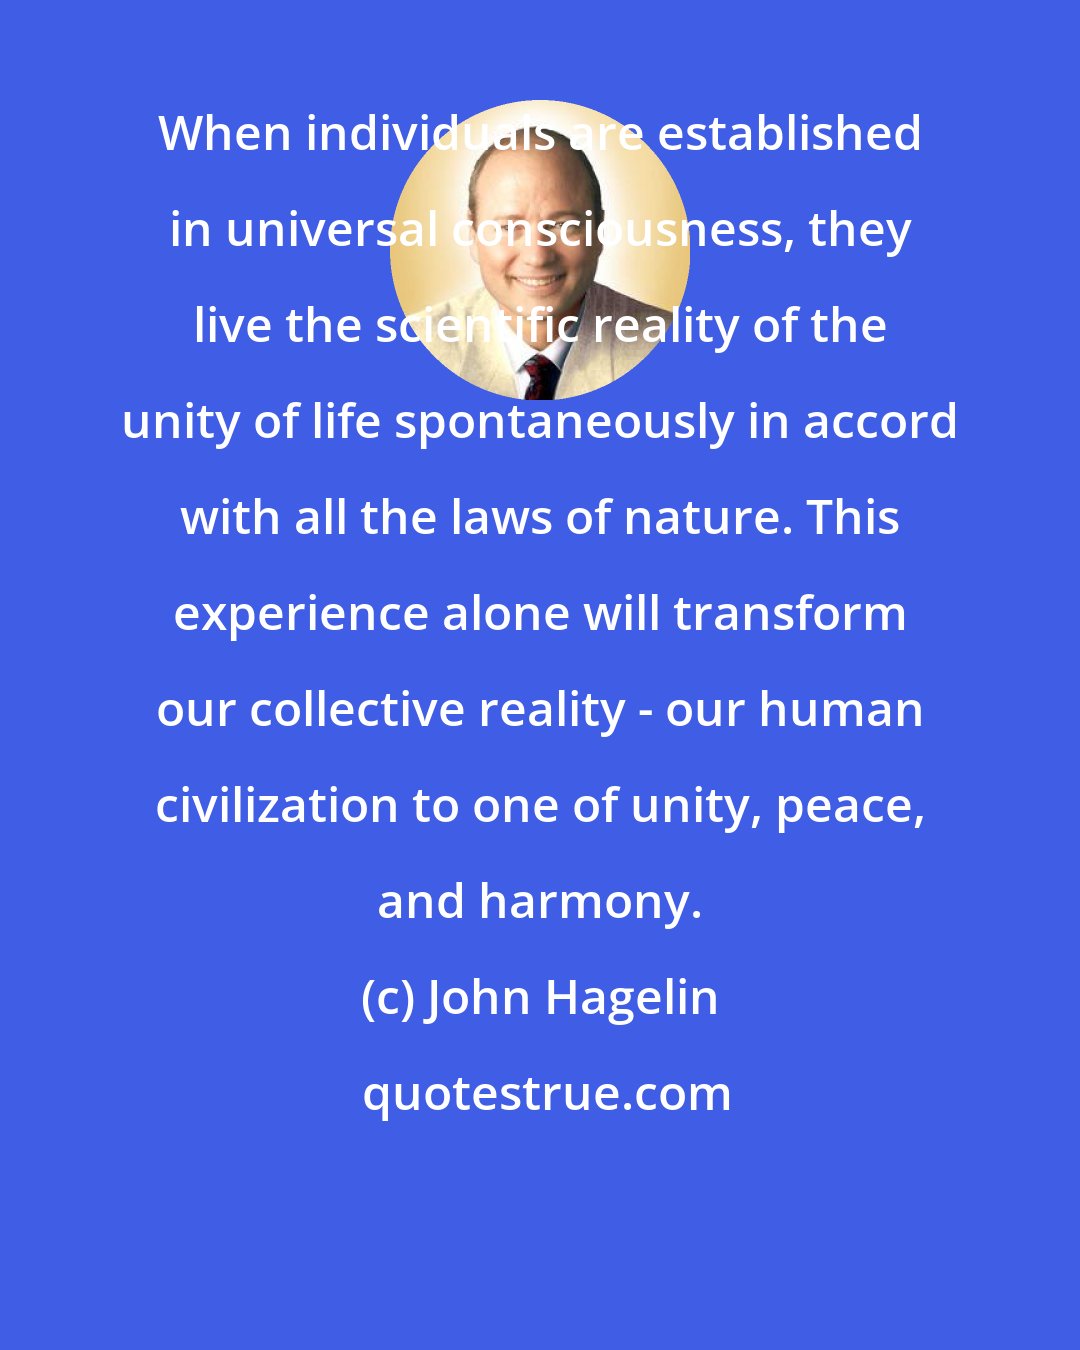 John Hagelin: When individuals are established in universal consciousness, they live the scientific reality of the unity of life spontaneously in accord with all the laws of nature. This experience alone will transform our collective reality - our human civilization to one of unity, peace, and harmony.